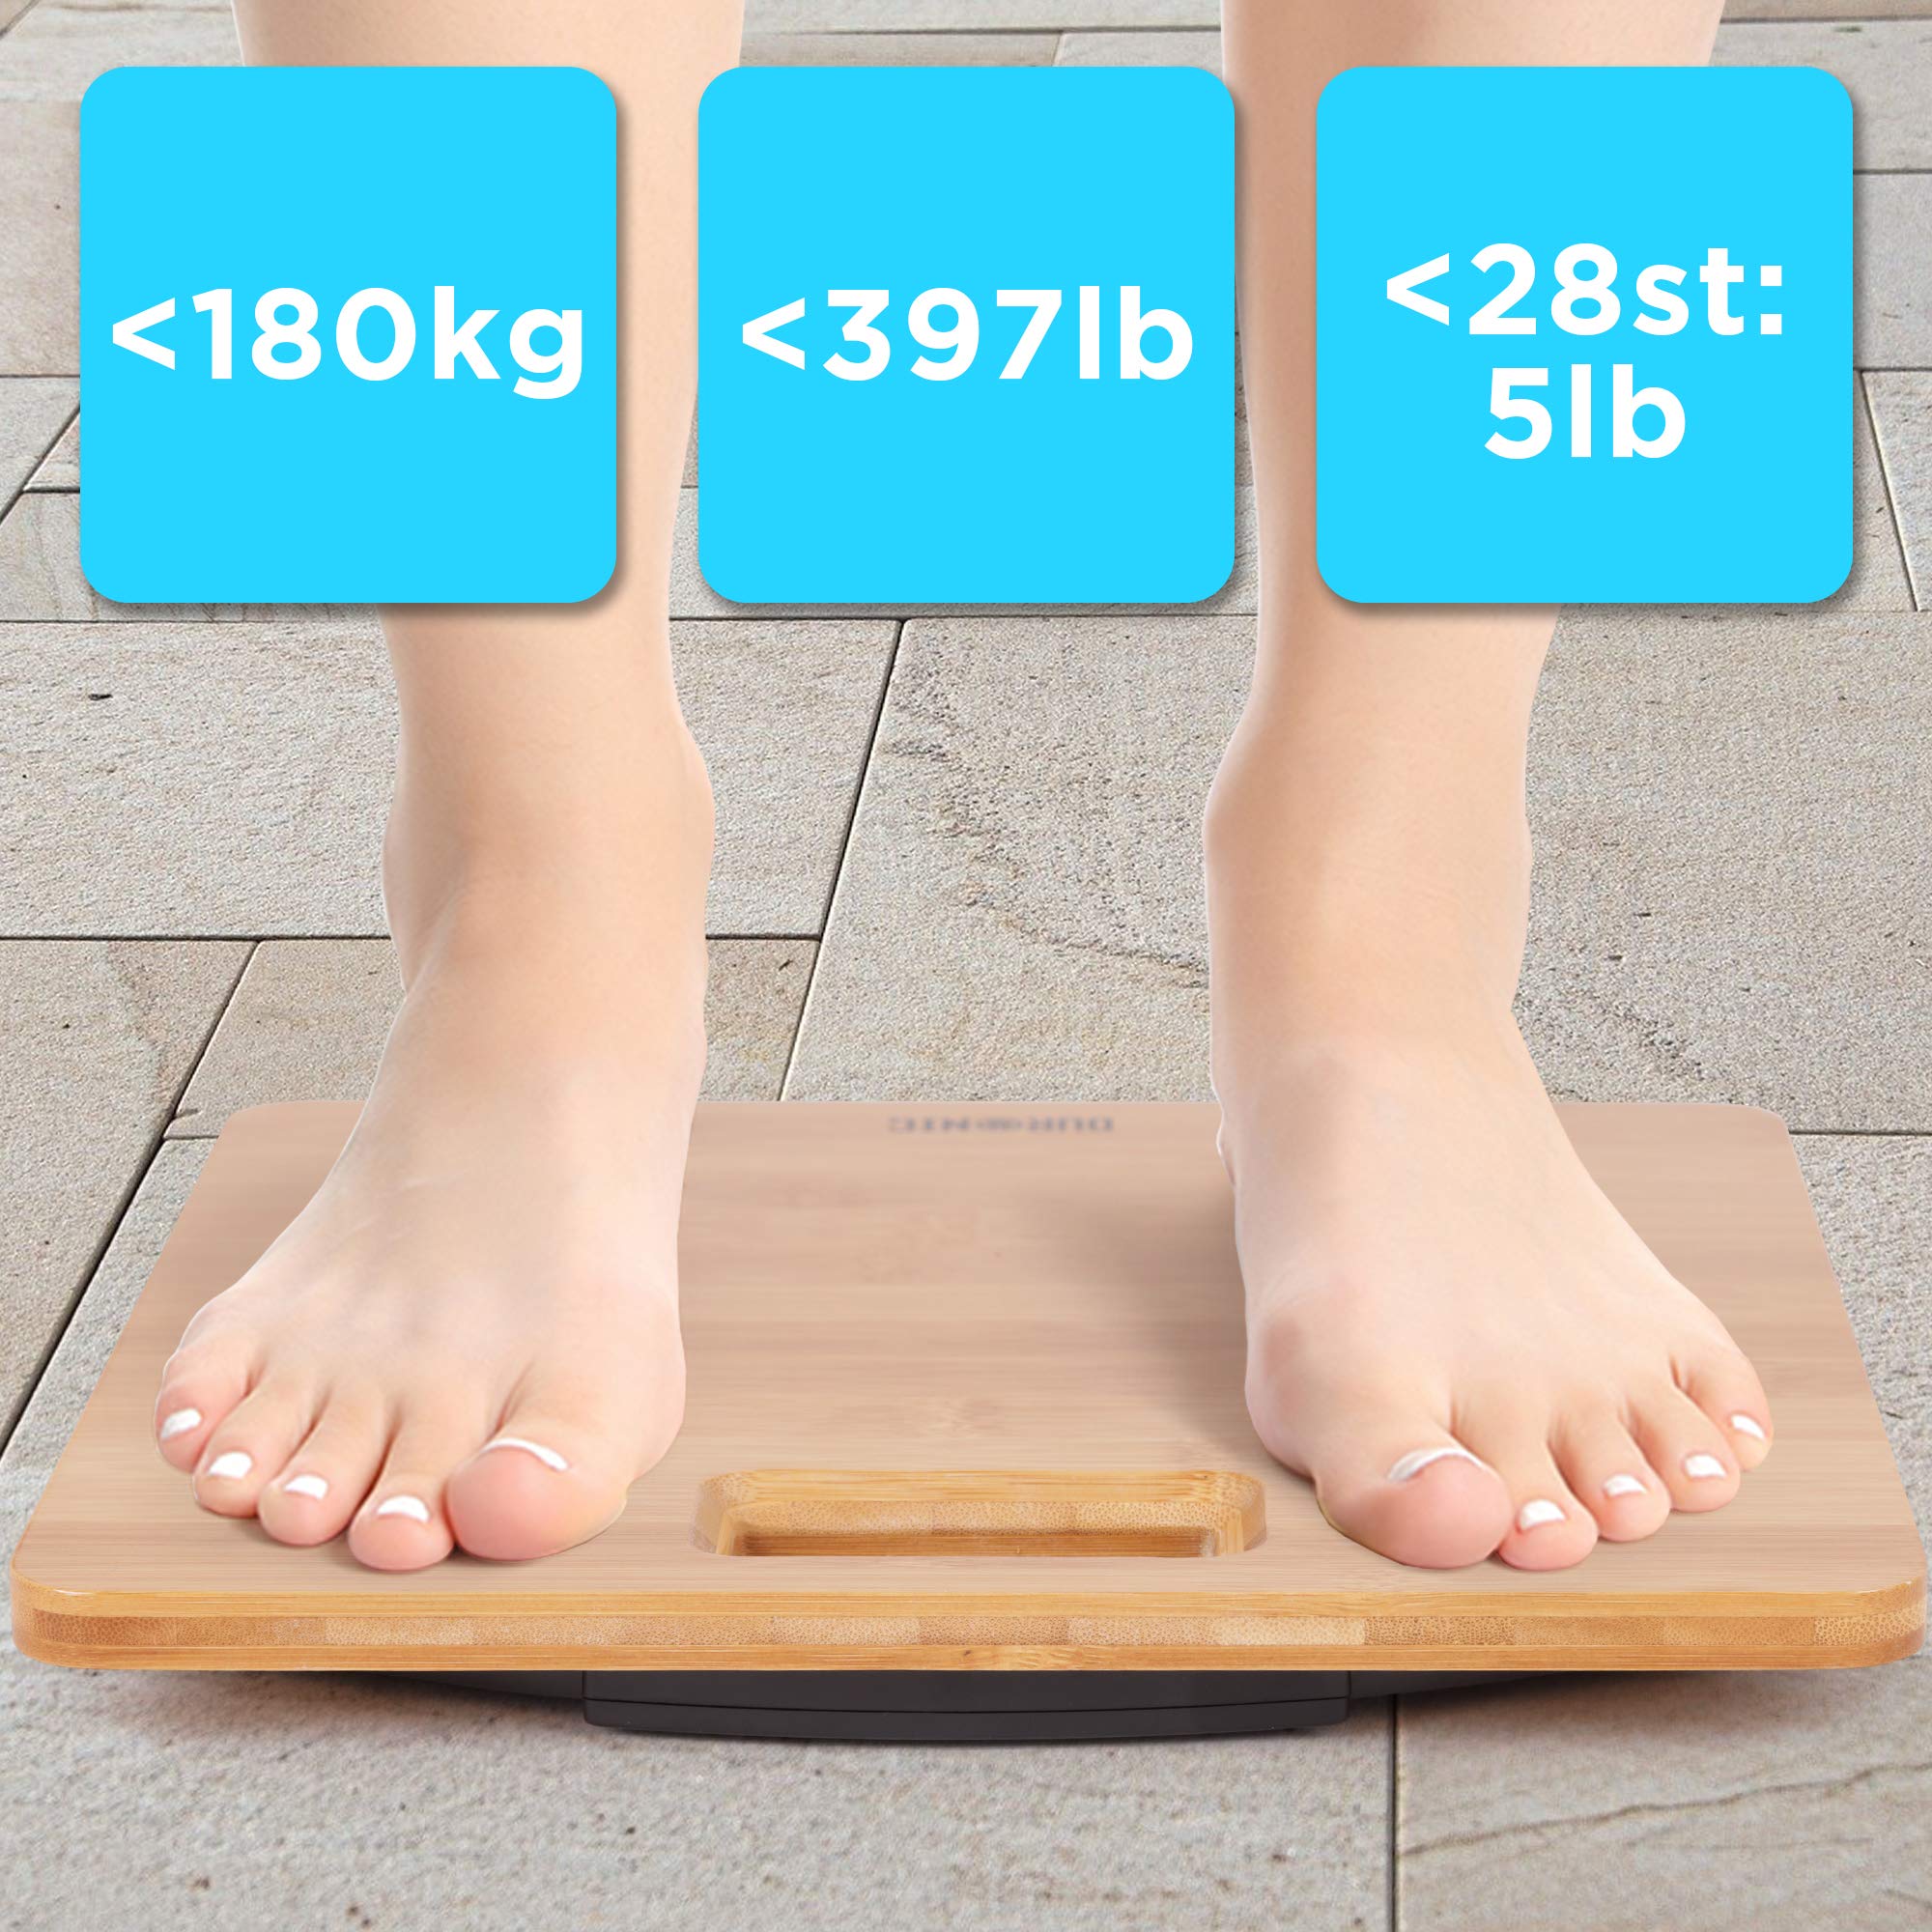 Duronic Digital Bathroom Body Scales BS503 - Measures Body Weight in Kilograms, Pounds and Stones - Lightweight Eco-Friendly Bamboo Design, Step-On Activation, Precision Sensors, 180kg Capacity